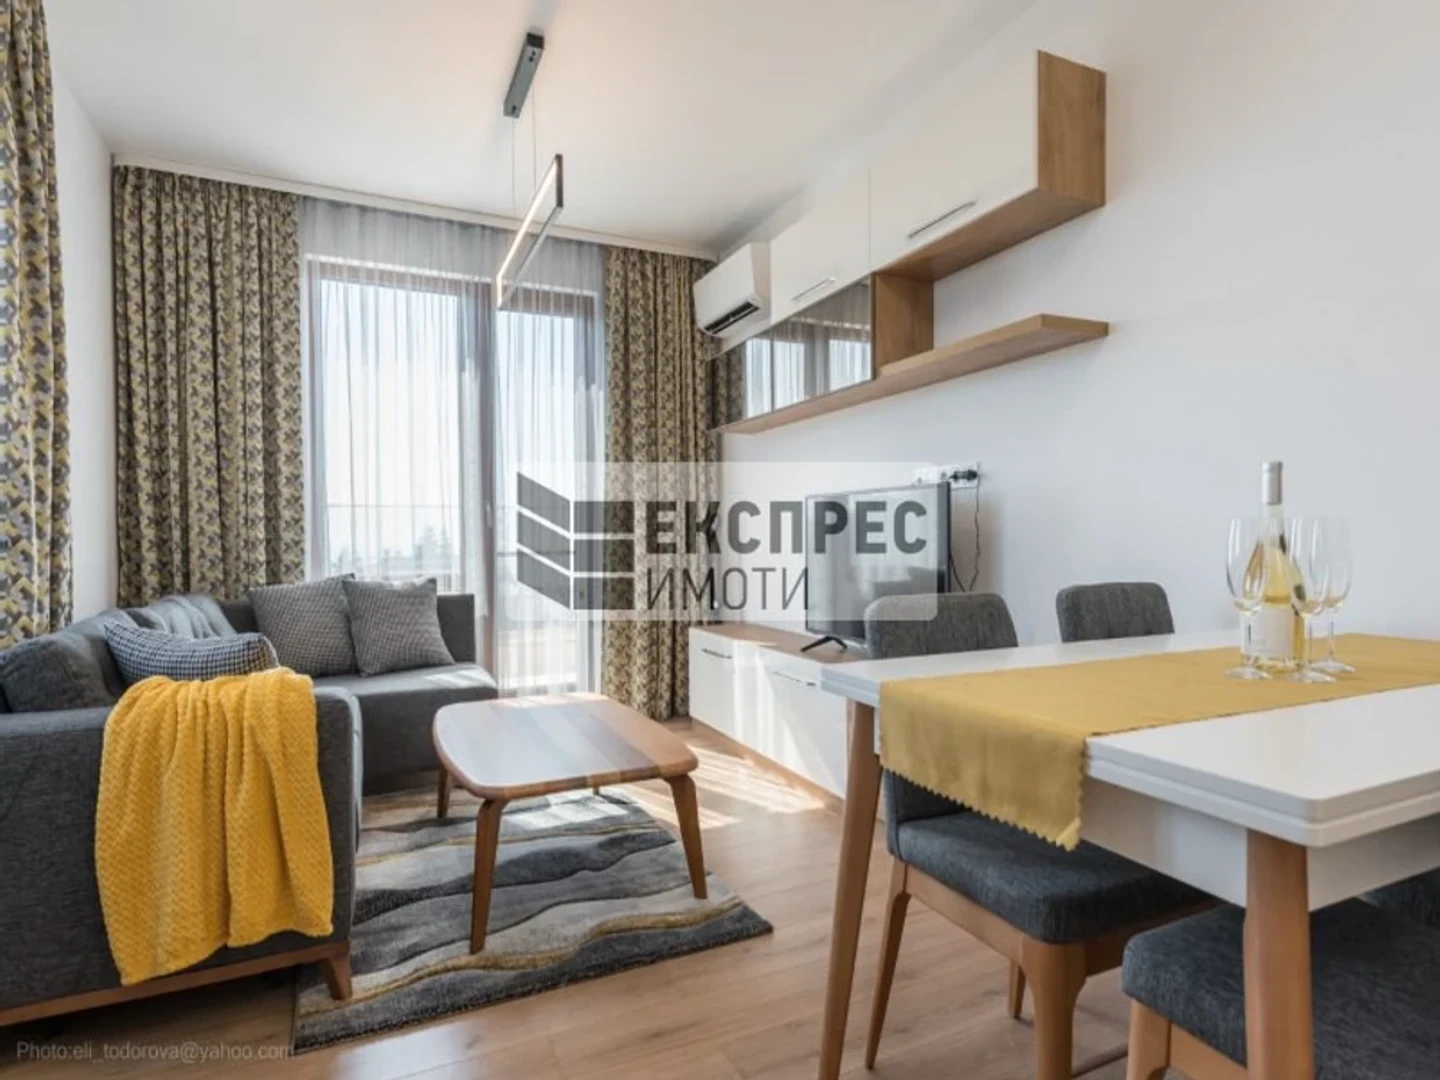 Accommodation in the centre of Varna